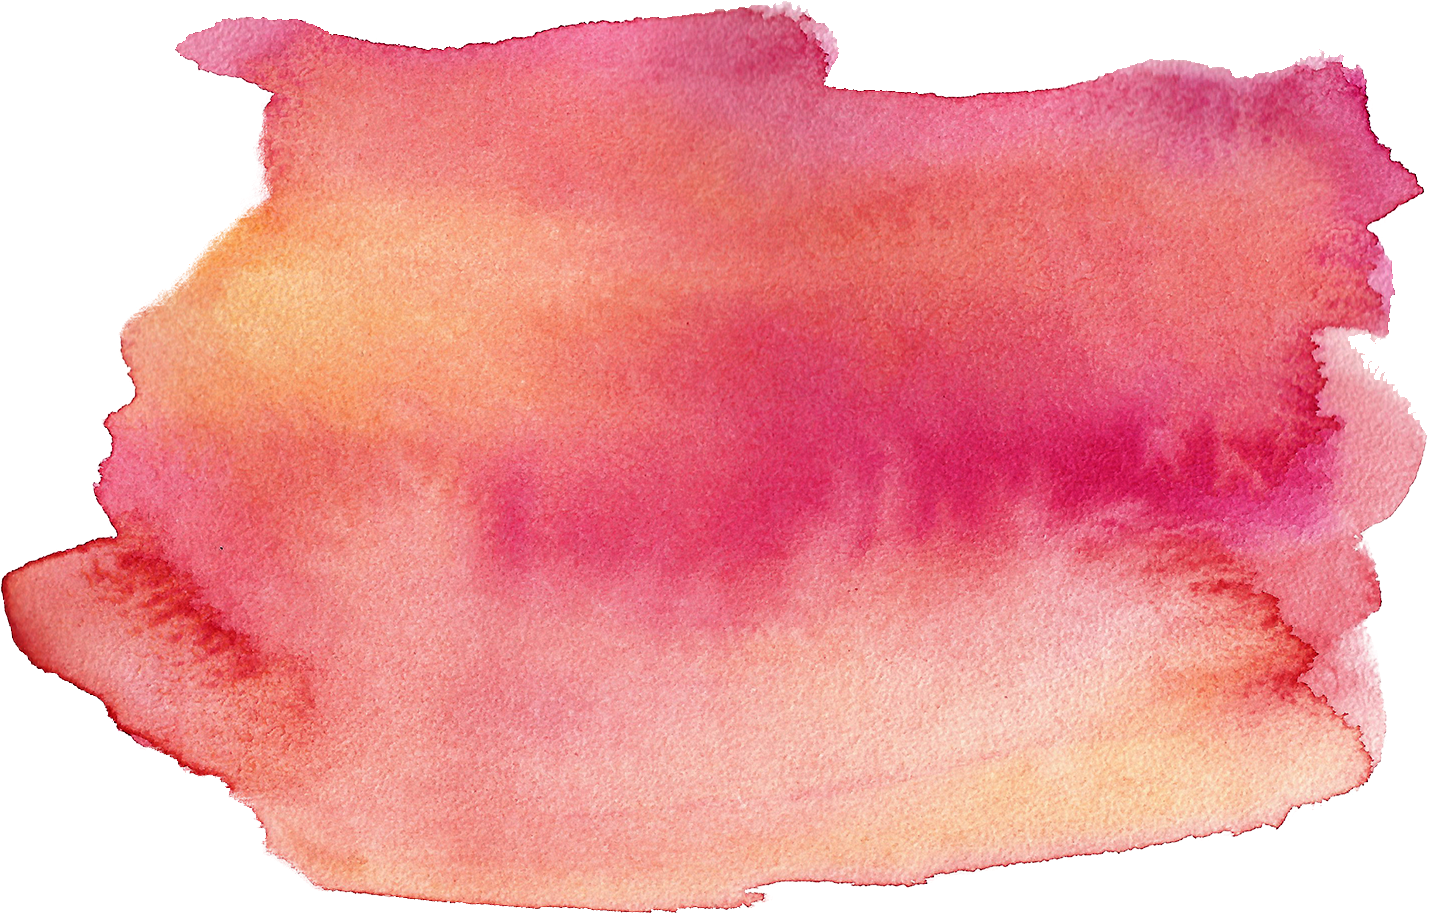 Download PNG image - Watercolor Transparent Background 